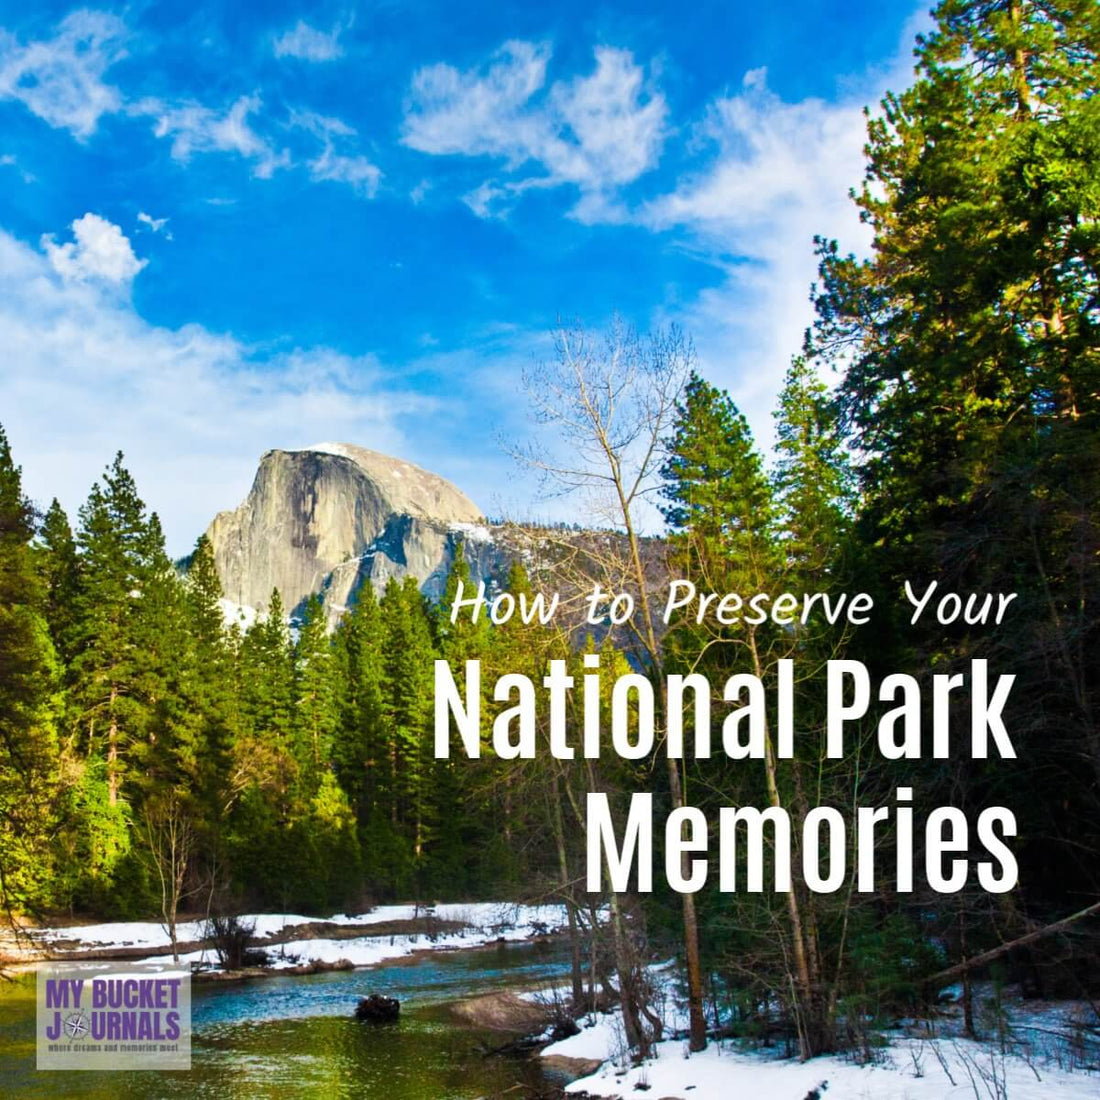 How to Preserve Your National Park Memories